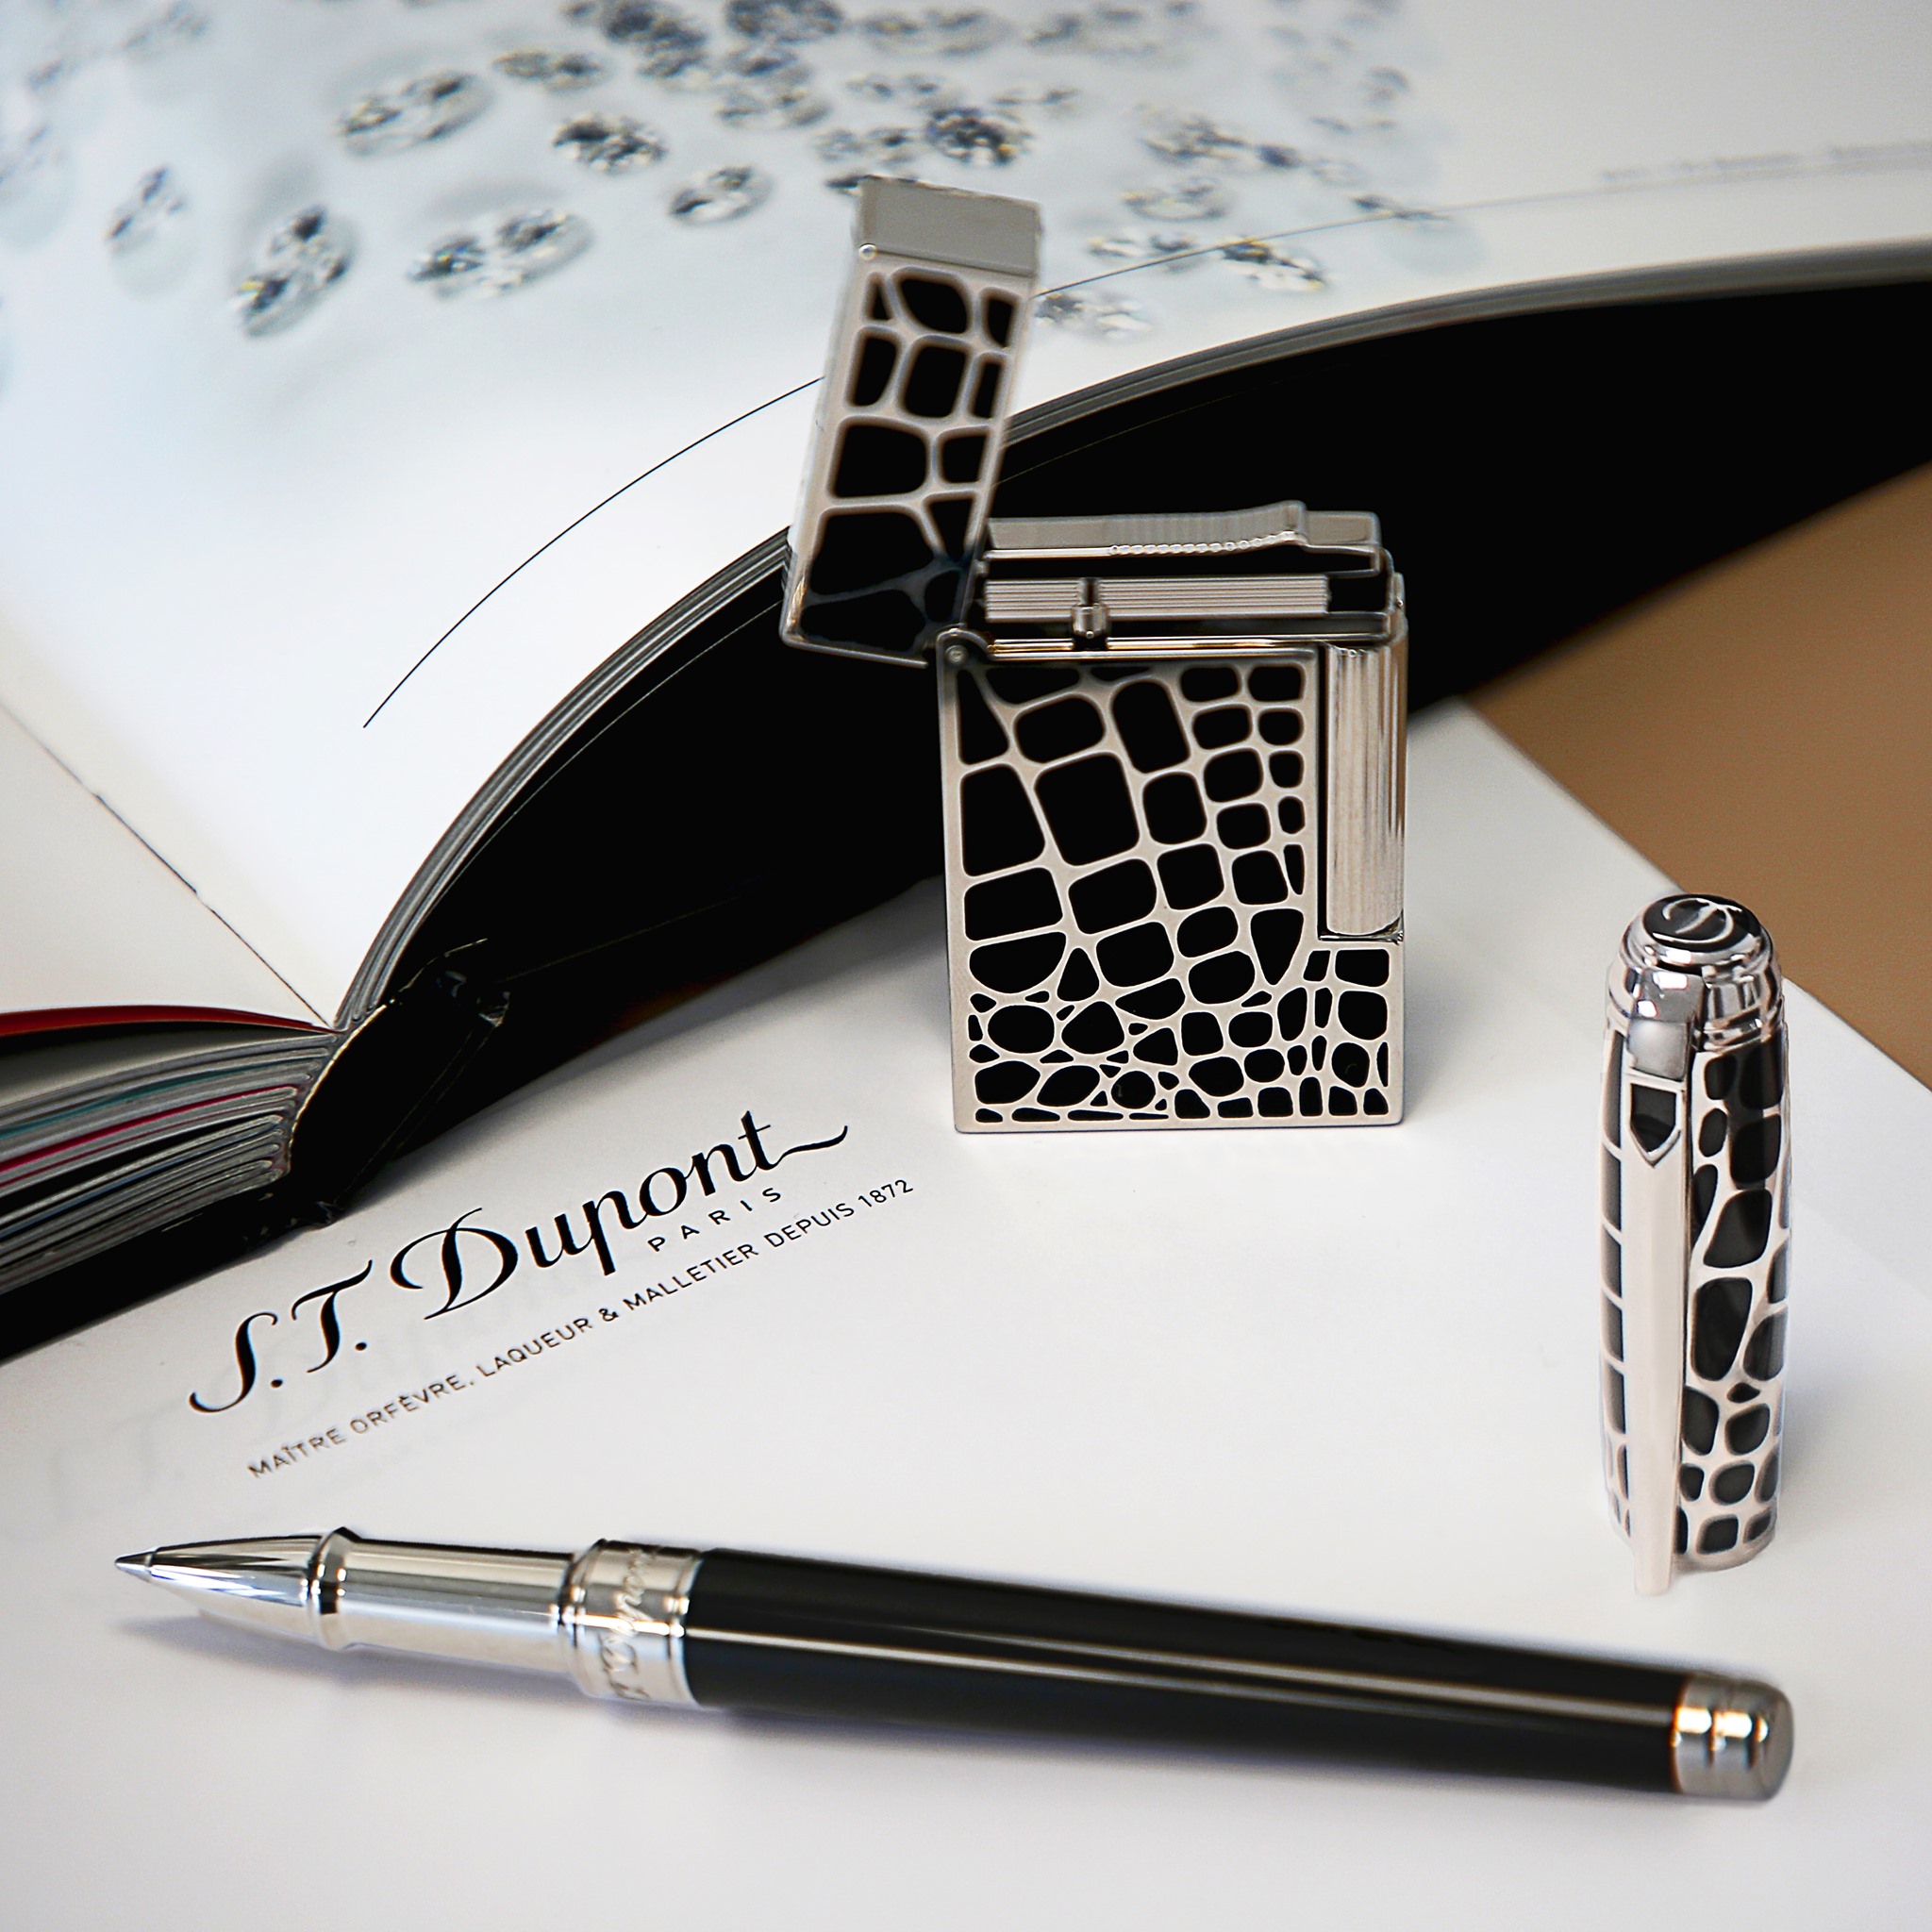 Featuring goldsmith and lacquer know-how, these croco-pattern matching pen and lighter are remarkably refined and sophisticated :